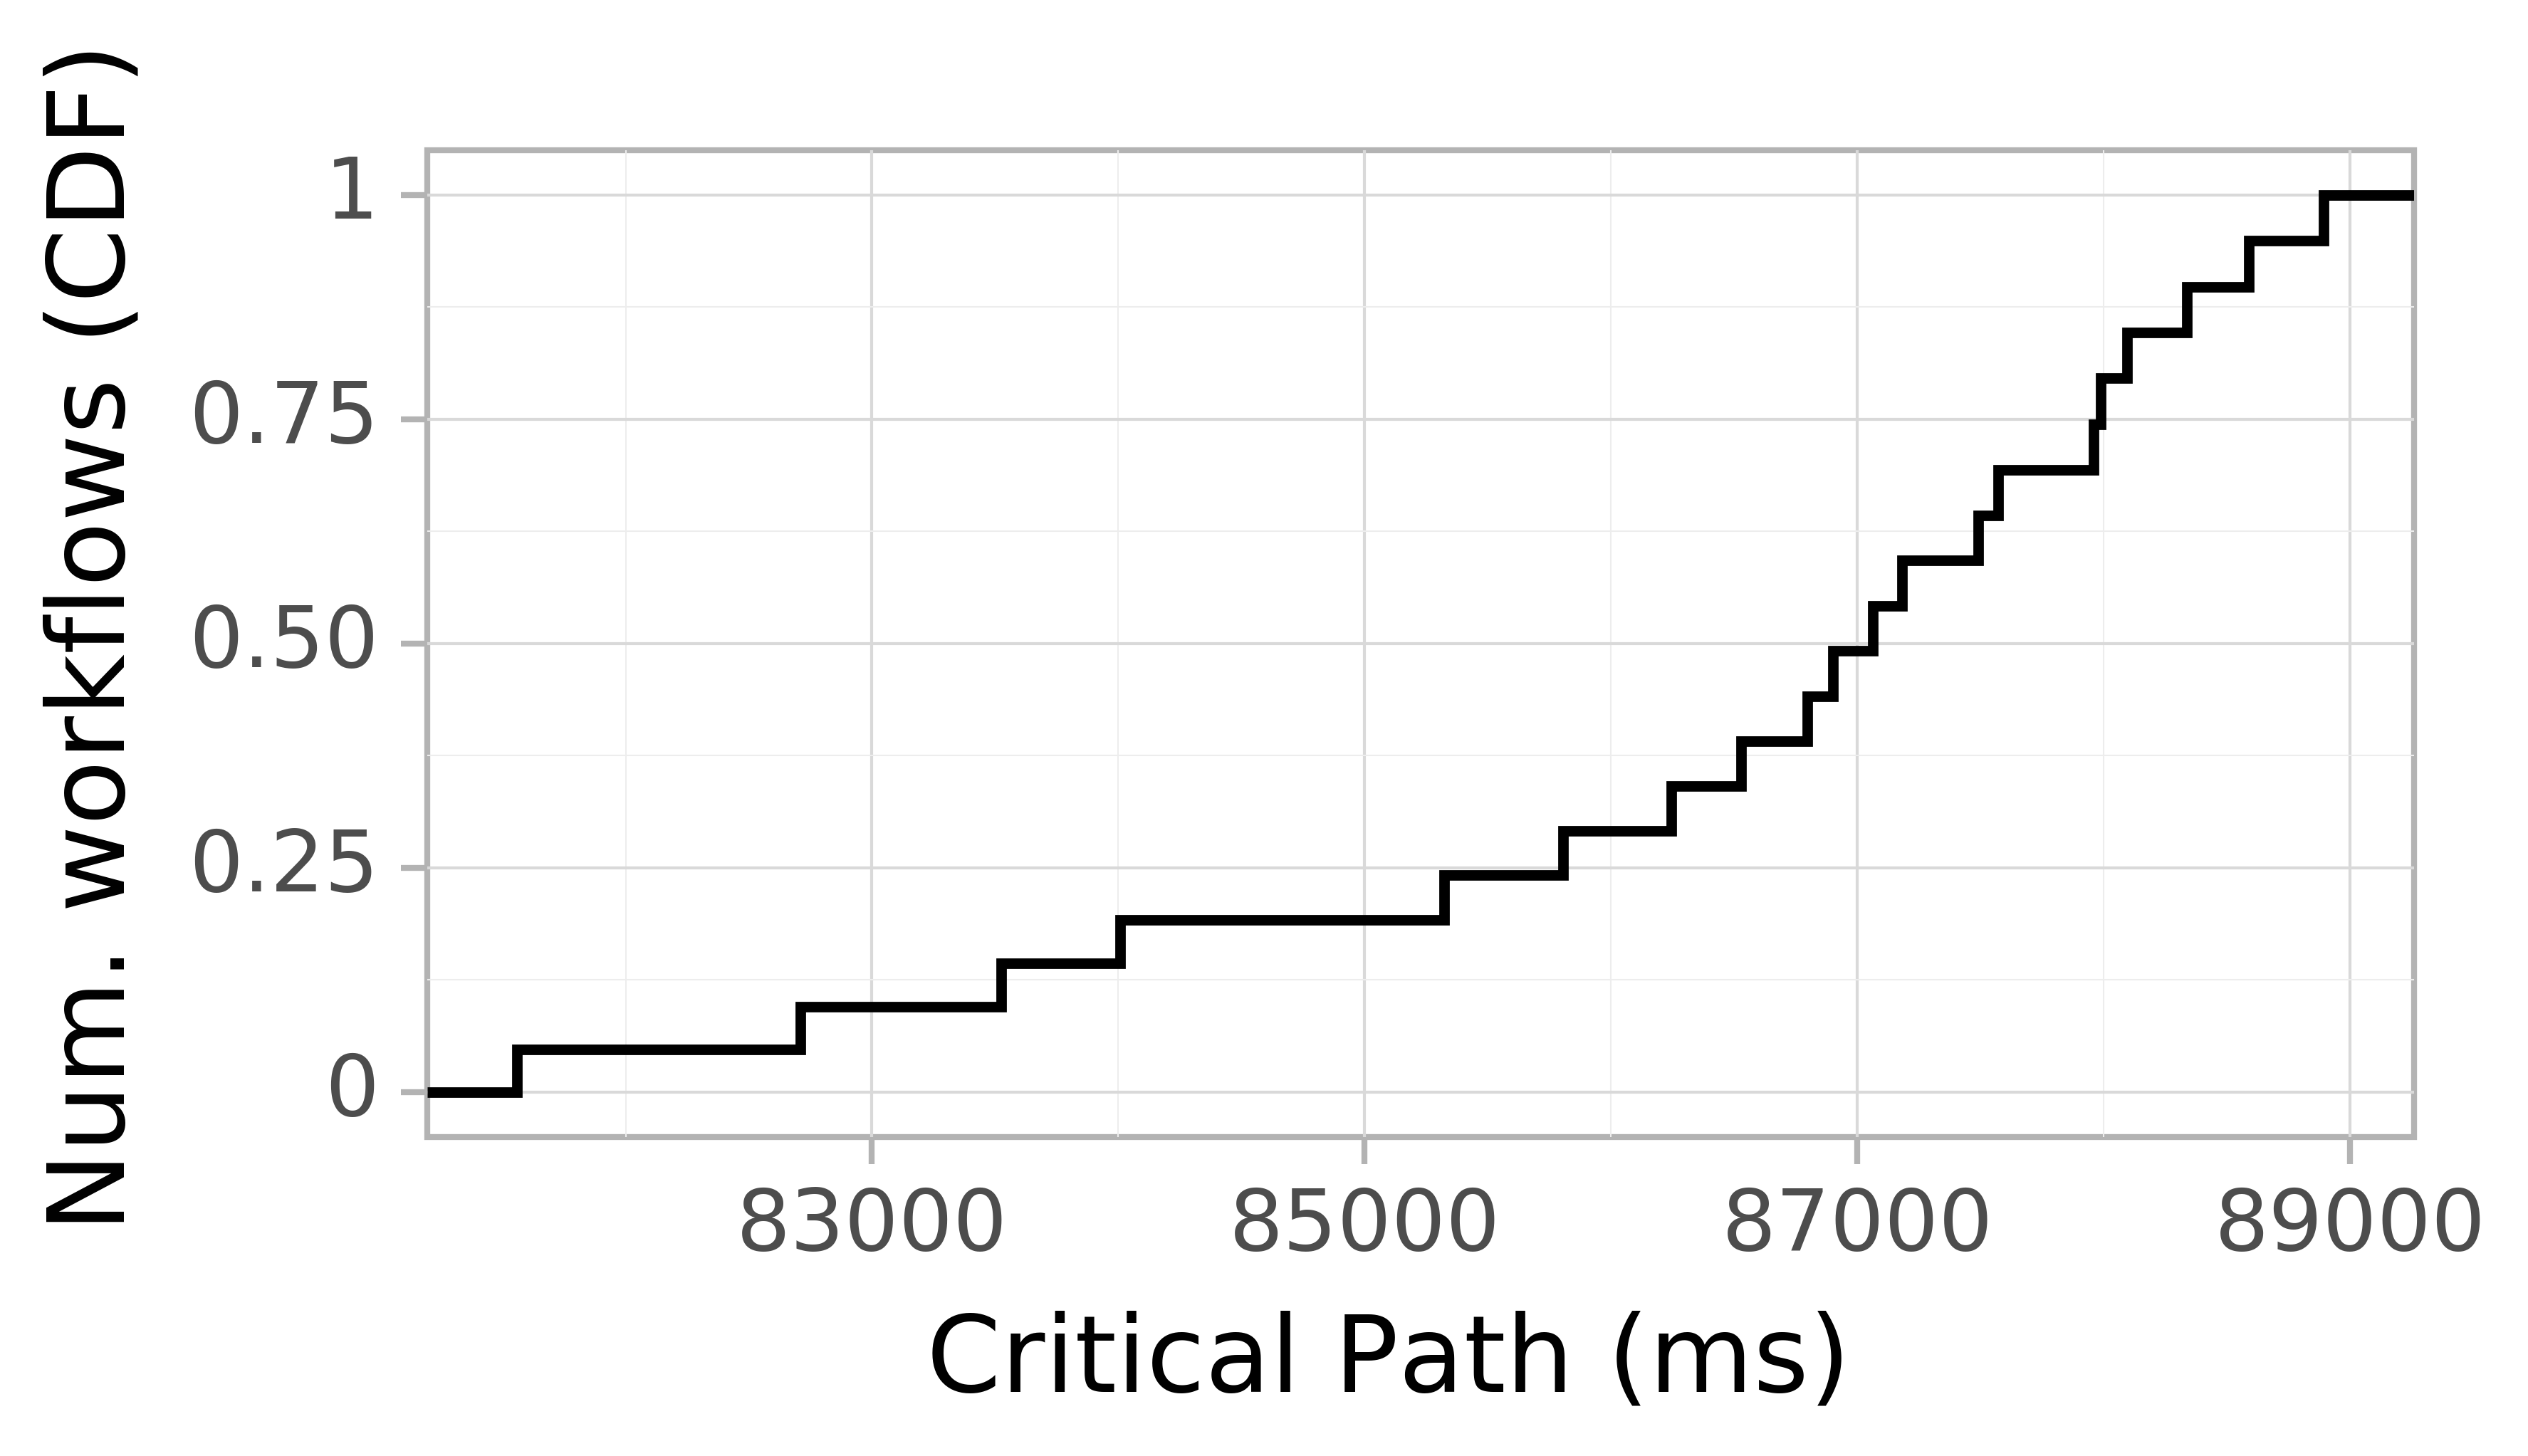 Job runtime CDF graph for the askalon-new_ee44 trace.